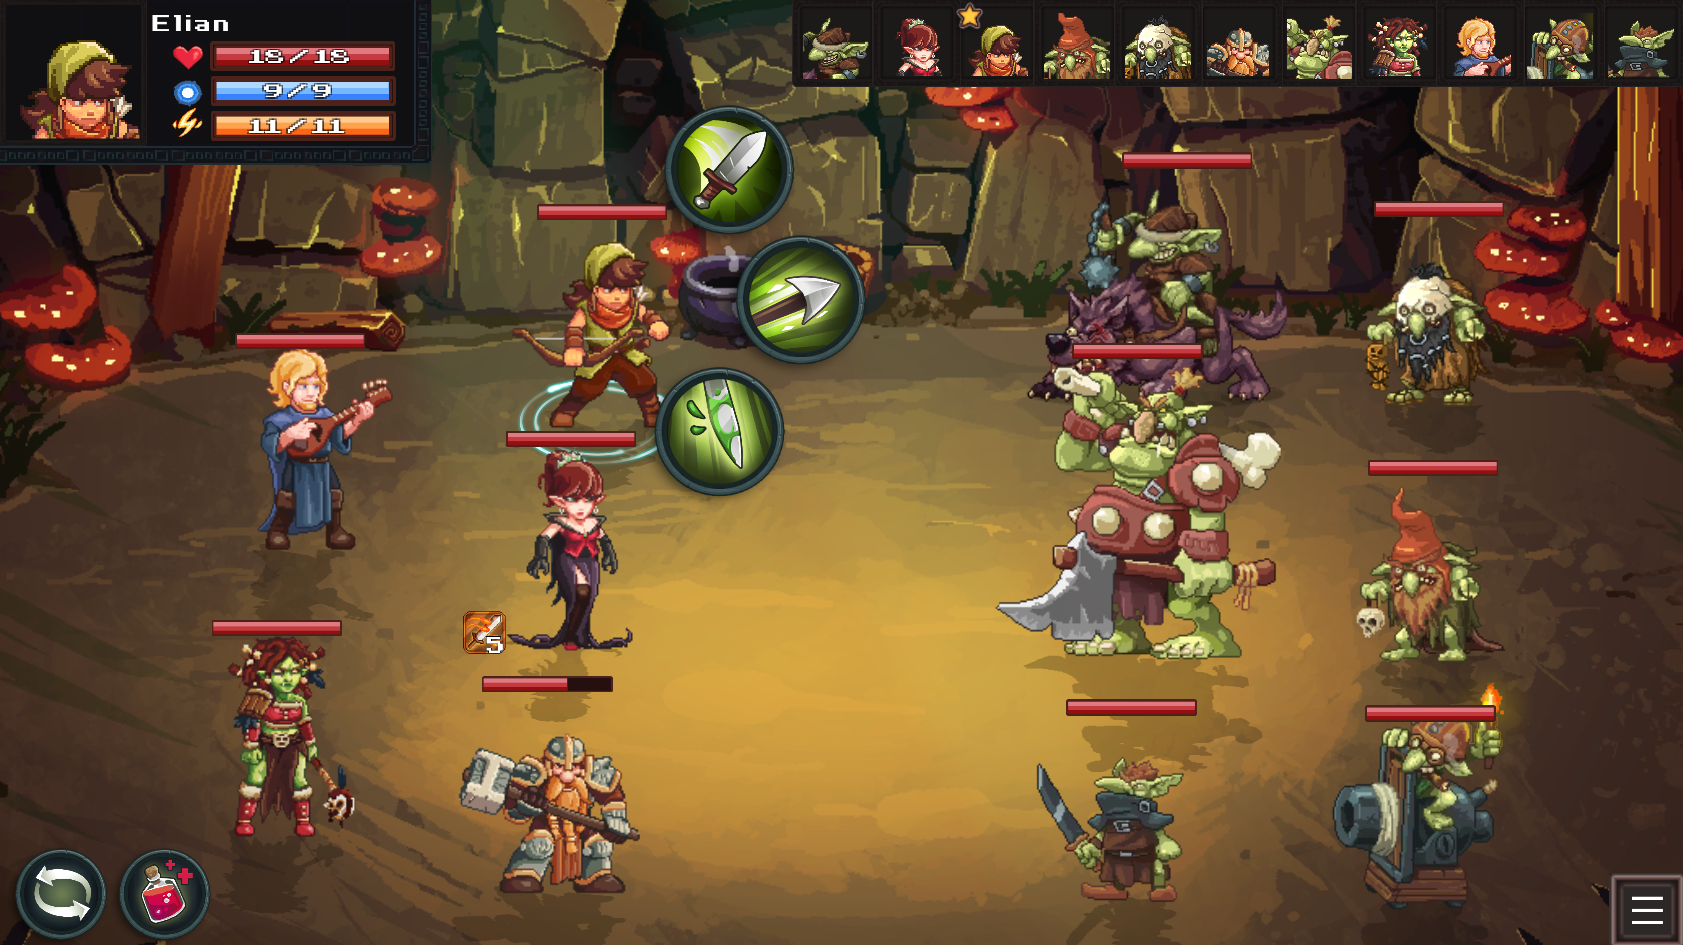 Dungeon Rushers PS4 Version Rated By PEGI